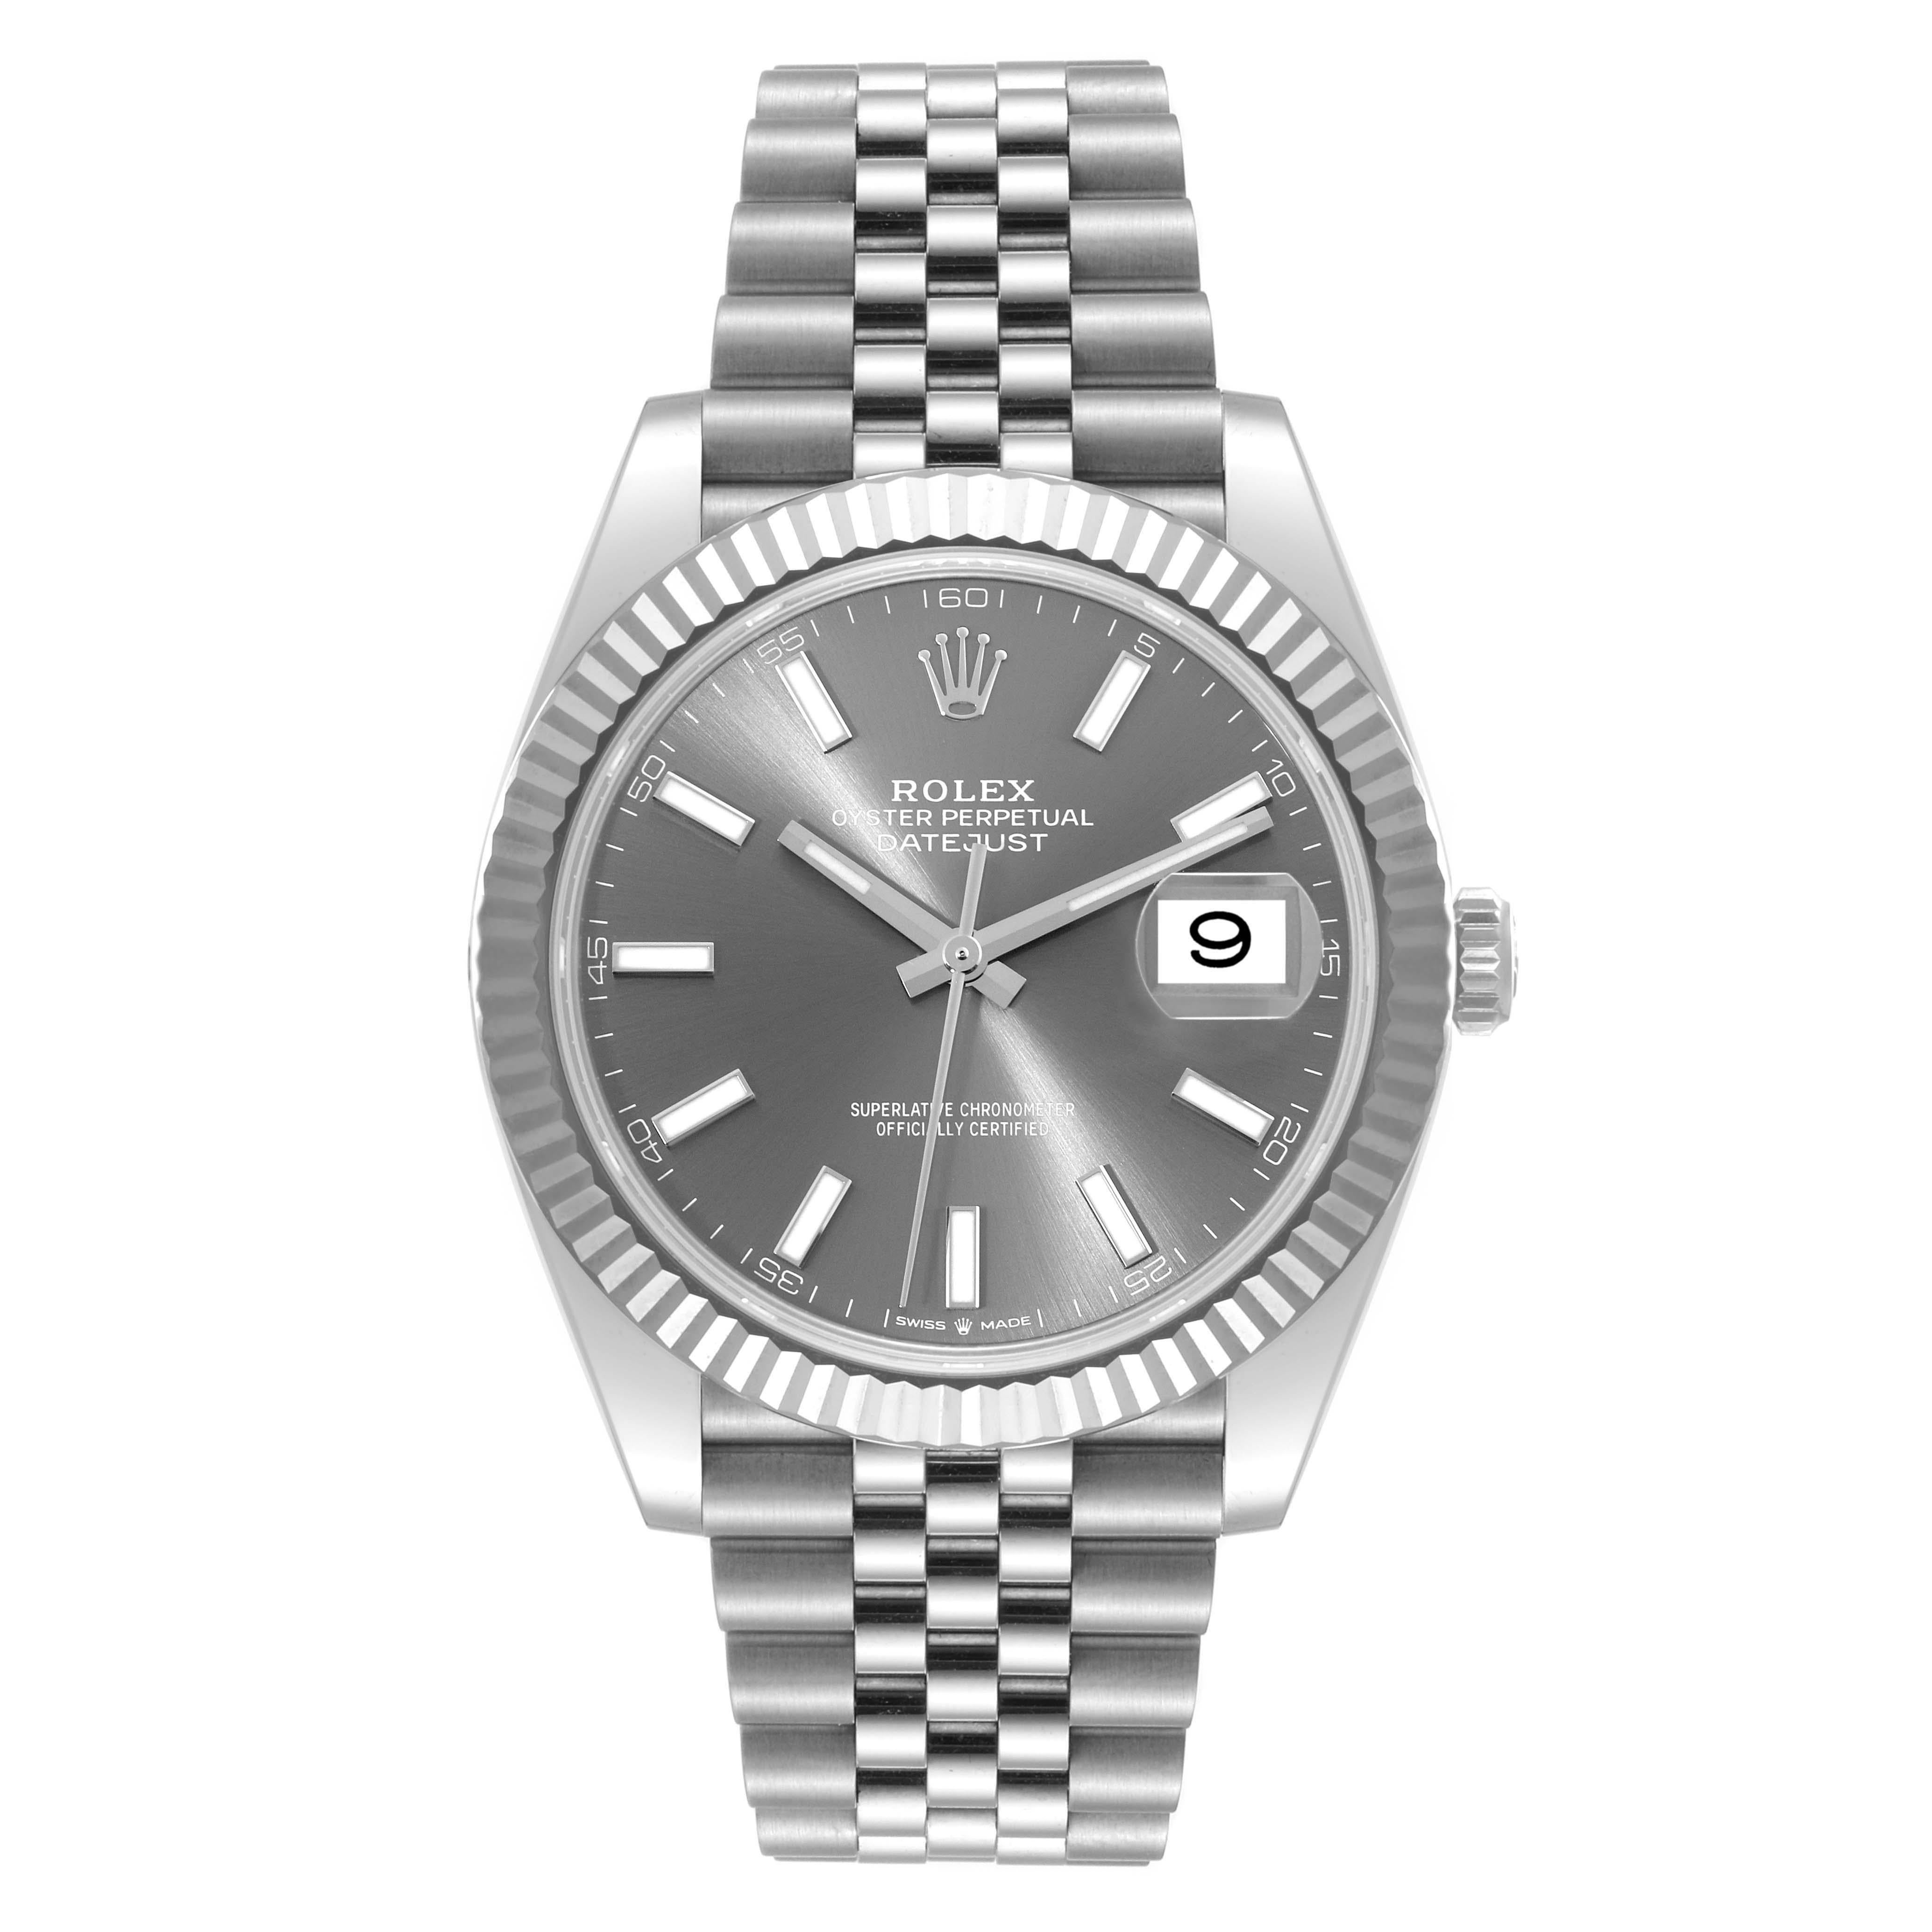 Rolex Datejust 41 Steel White Gold Slate Dial Mens Watch 126334 Unworn. Officially certified chronometer automatic self-winding movement. Stainless steel case 41 mm in diameter. Rolex logo on the crown. 18K white gold fluted bezel. Scratch resistant